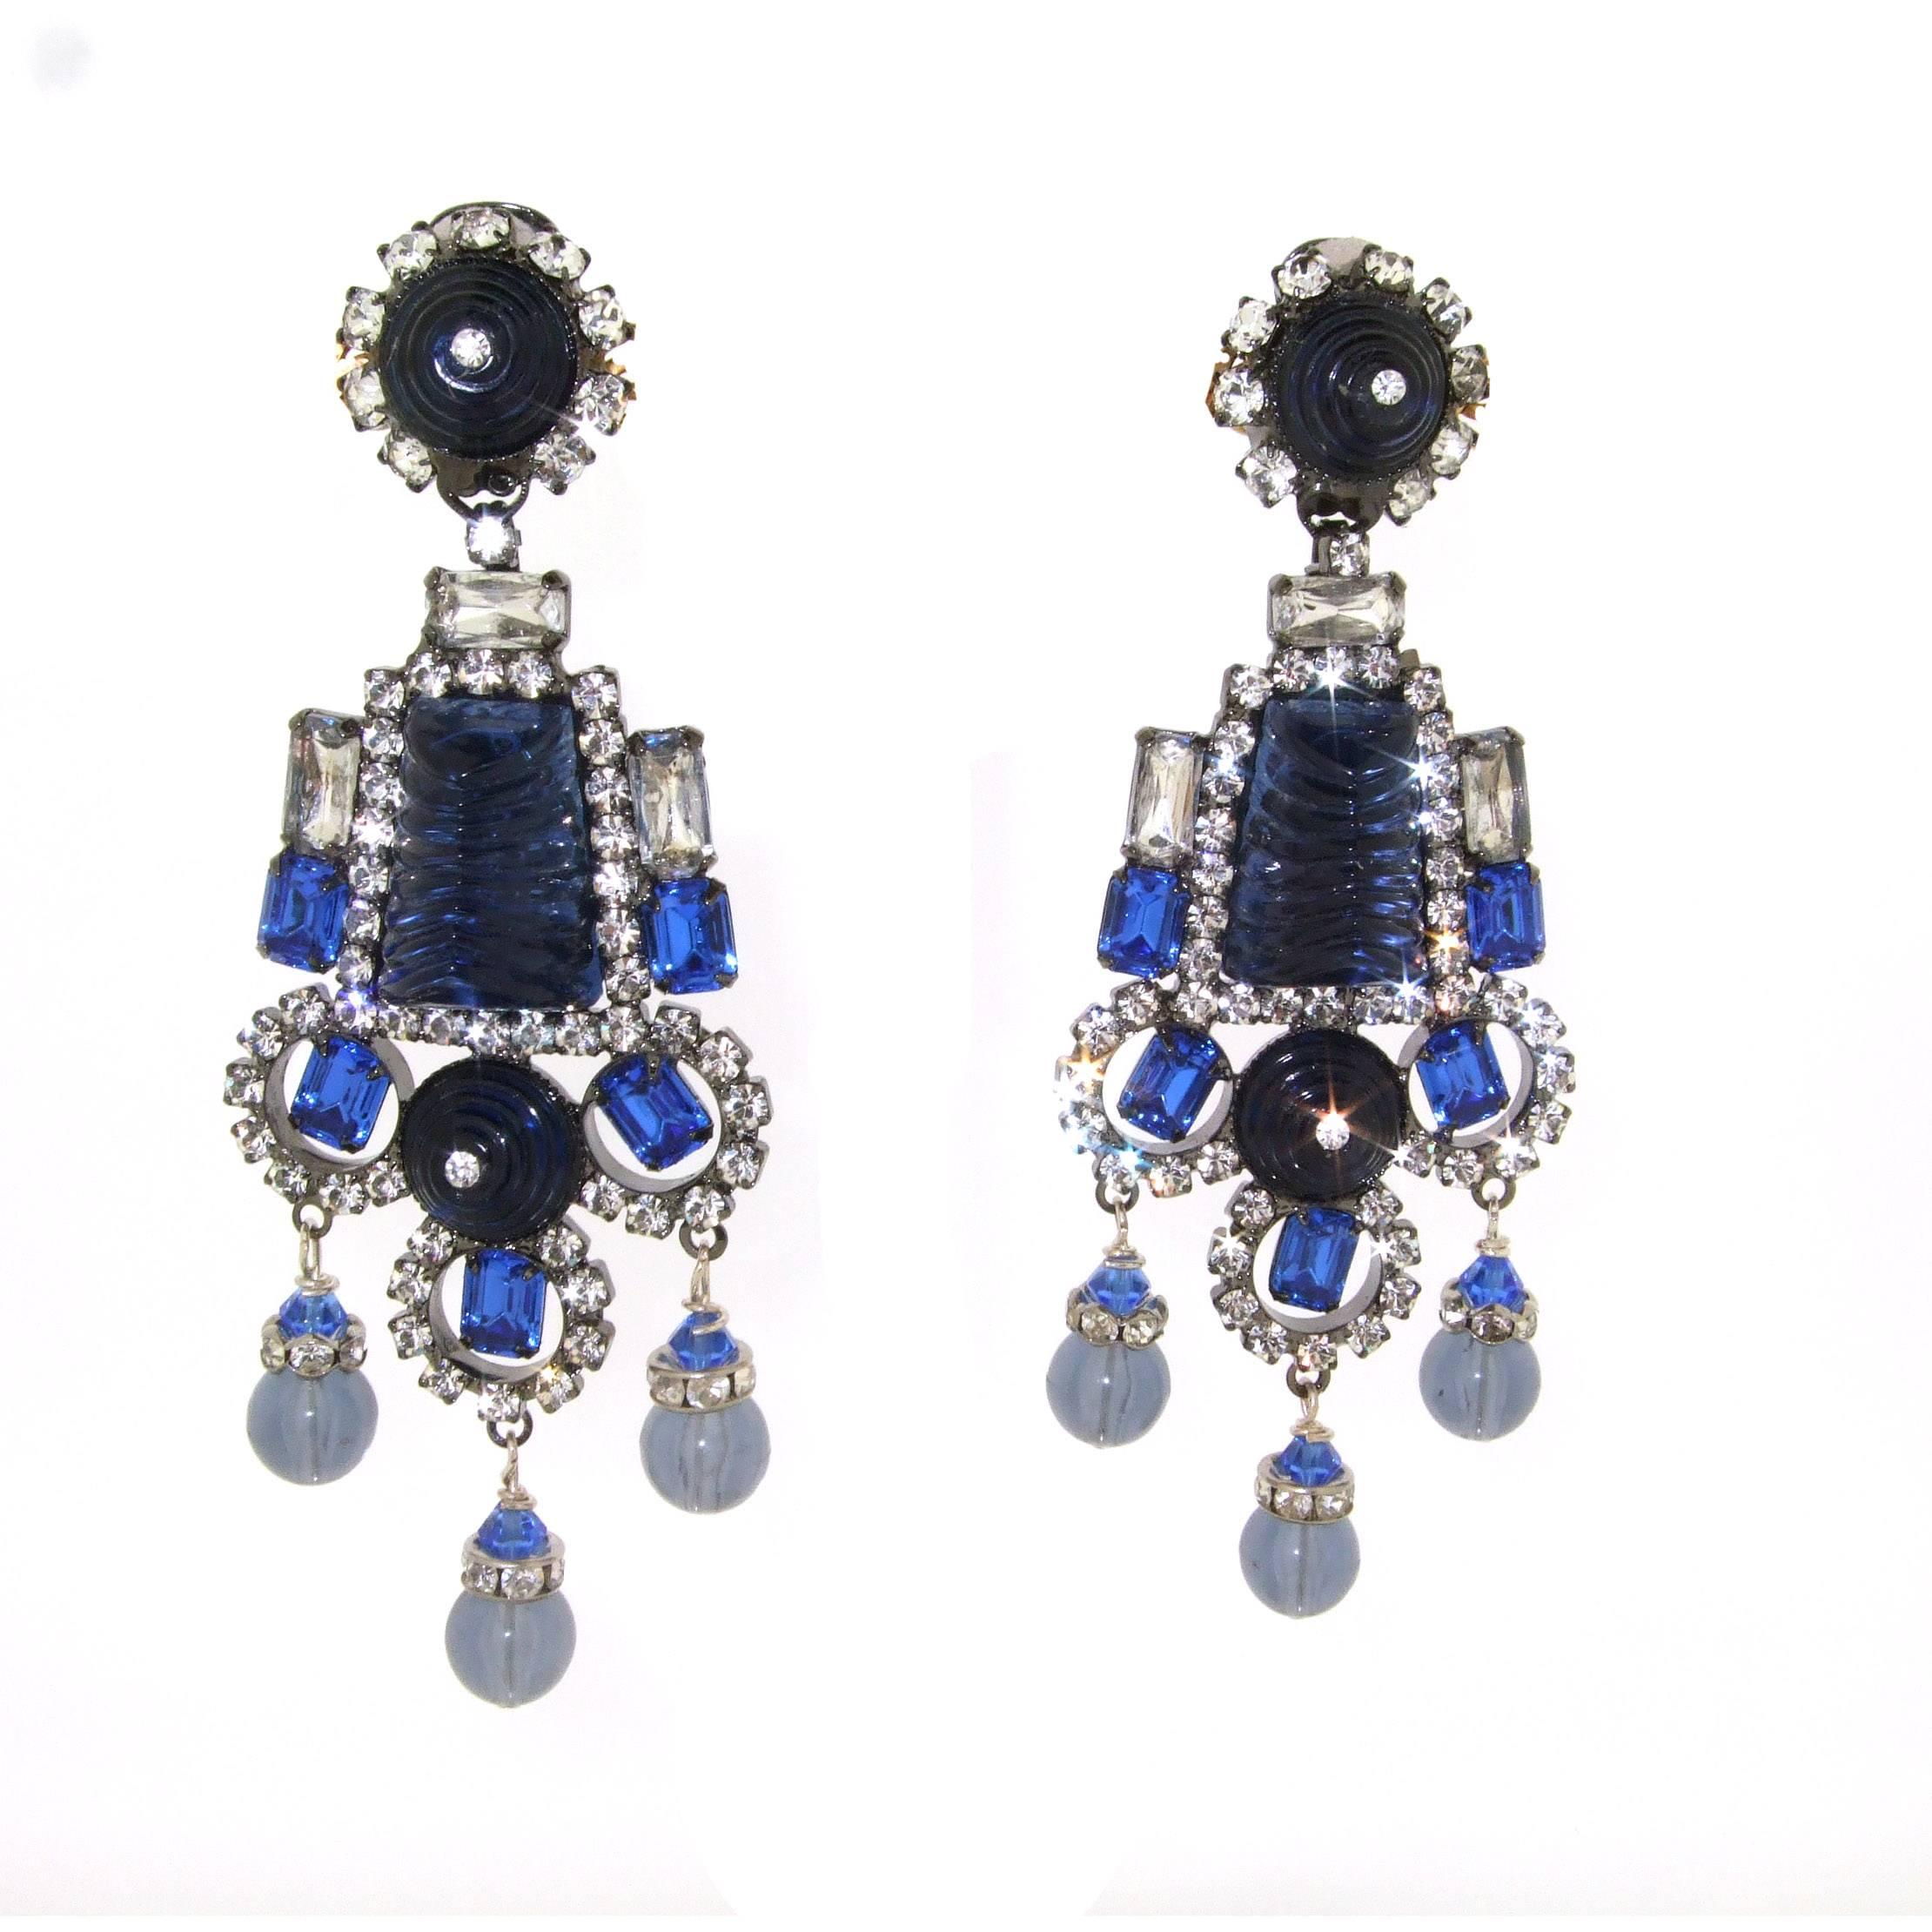 A fabulous pair of statement clip on earrings by Lawrence 'Larry' Vrba. Vintage glass and crystal set in antiqued metal.

They measure 10.6 cm drop by 2cm wide at the top, 3.9cm wide lower down at the widest point. 